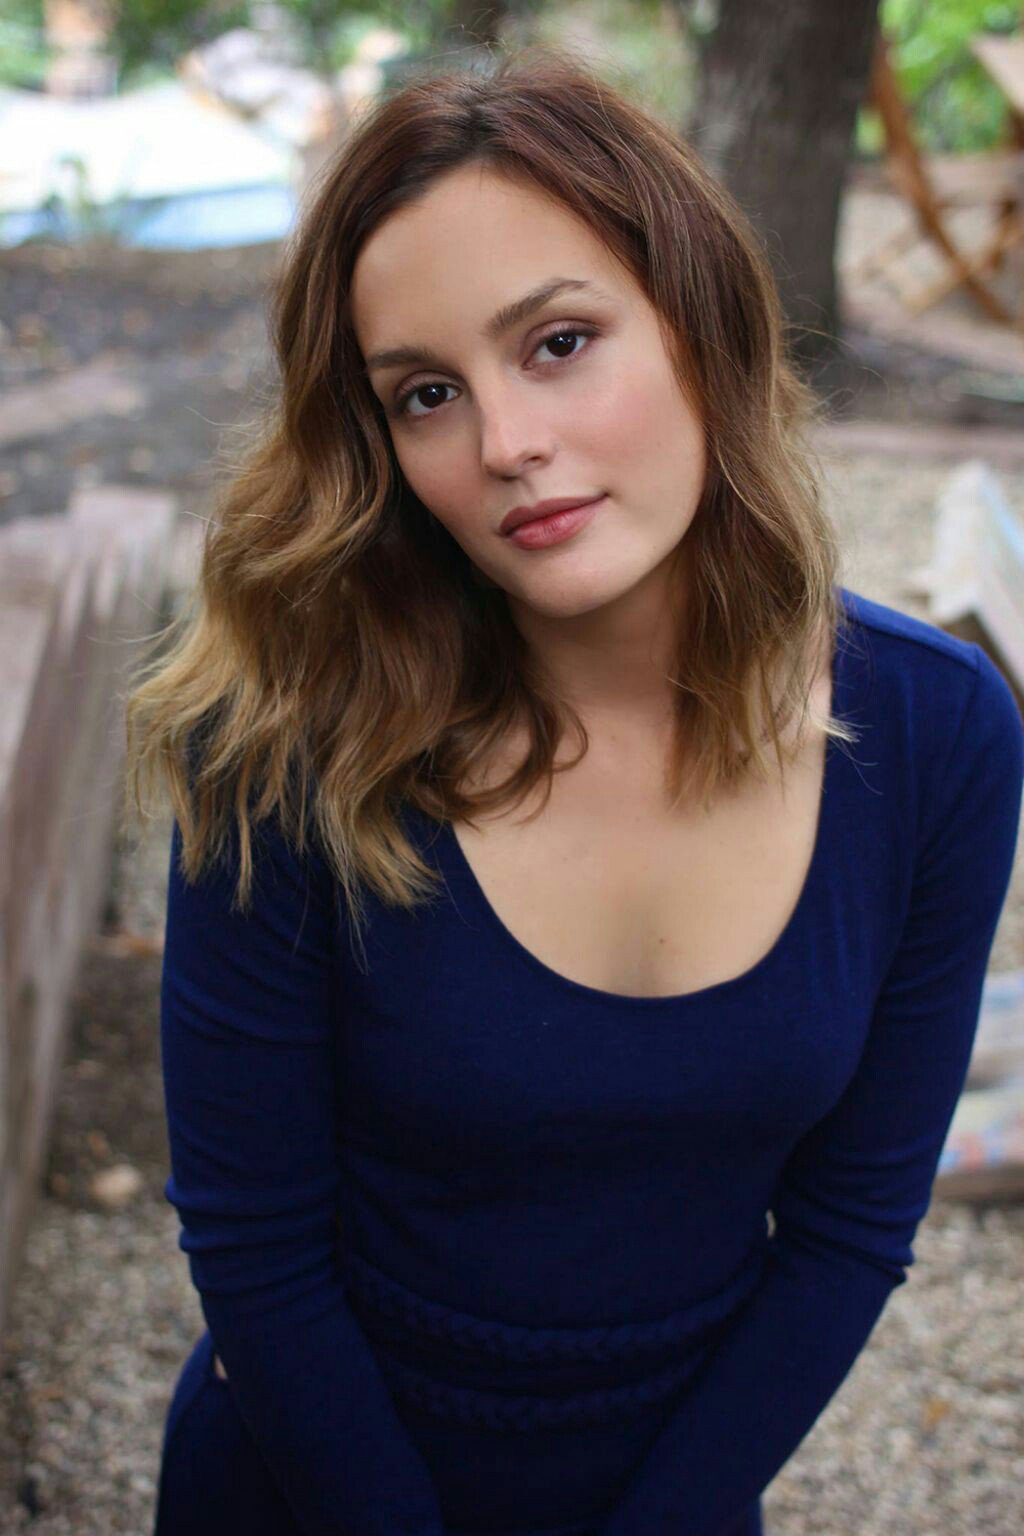 Happy birthday leighton meester thank you for all these years of light in my life, i love you. 